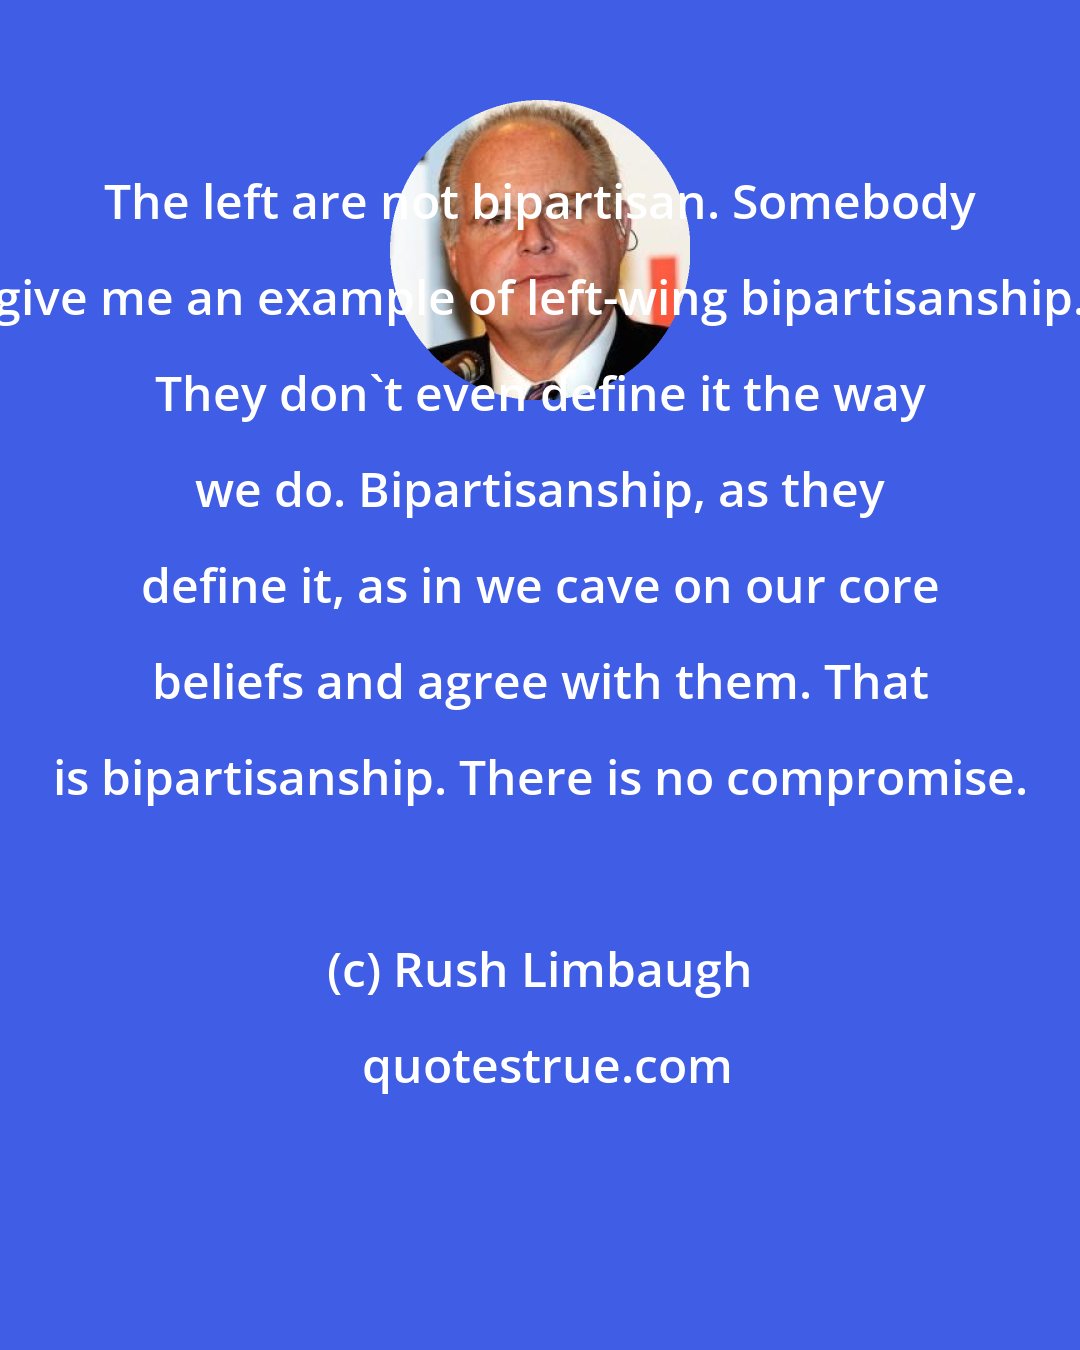 Rush Limbaugh: The left are not bipartisan. Somebody give me an example of left-wing bipartisanship. They don't even define it the way we do. Bipartisanship, as they define it, as in we cave on our core beliefs and agree with them. That is bipartisanship. There is no compromise.